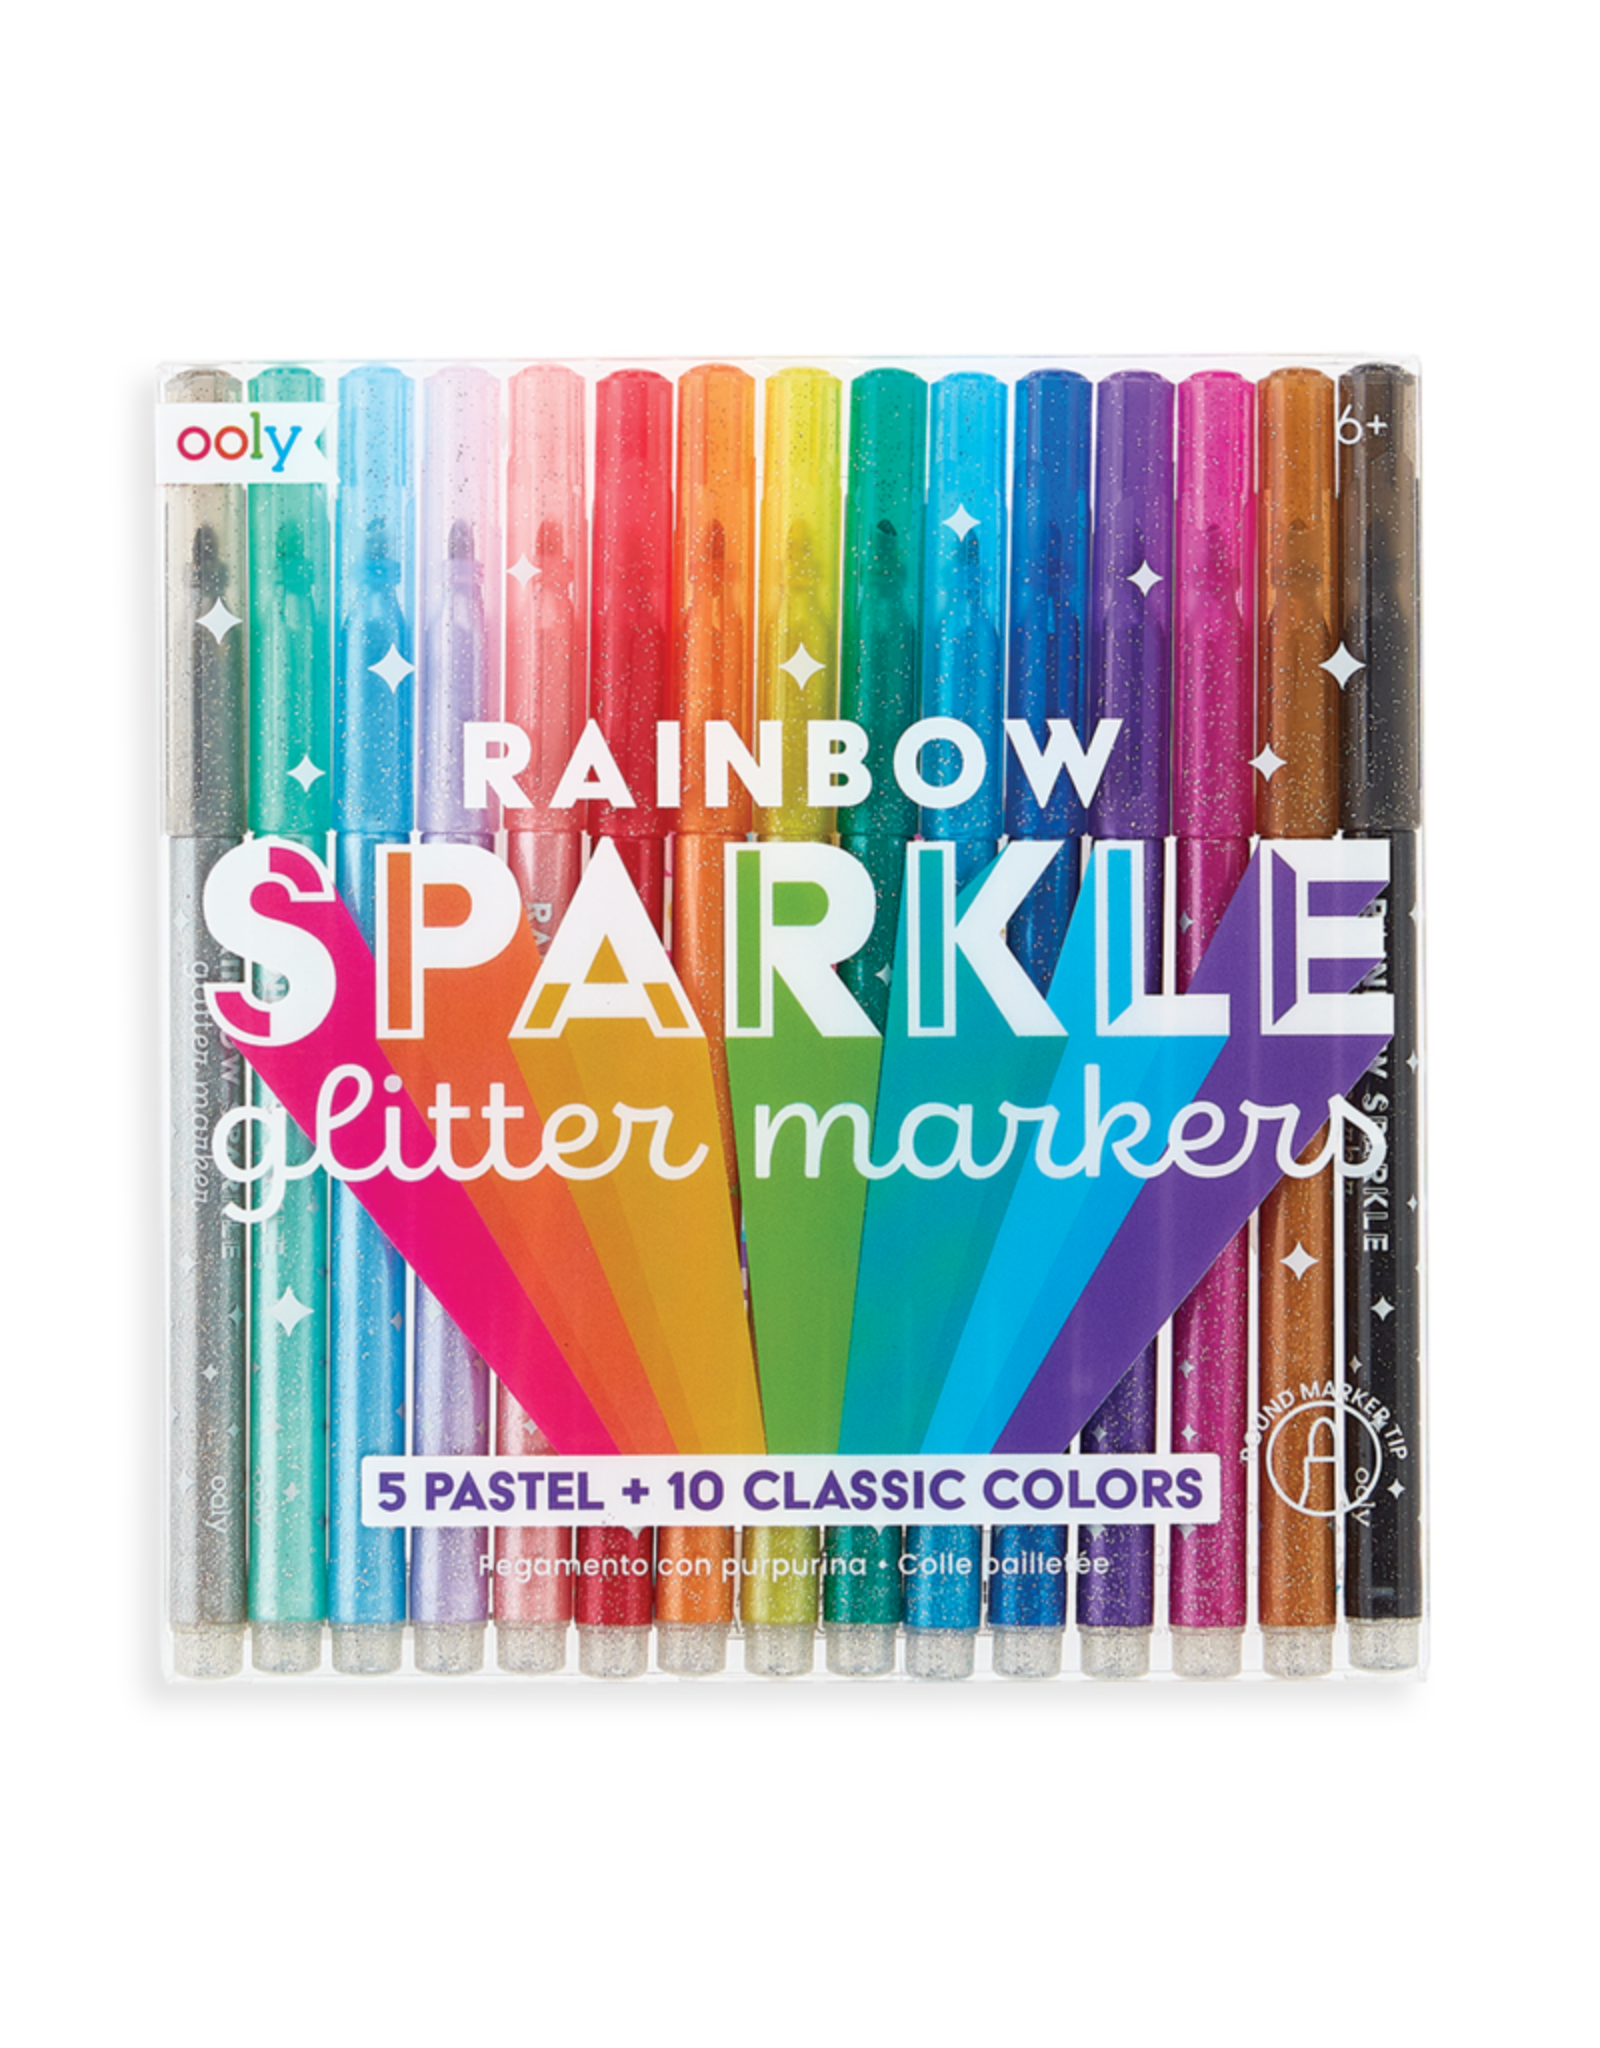 Ooly Rainbow Sparkle Glitter Markers - Set Of 15